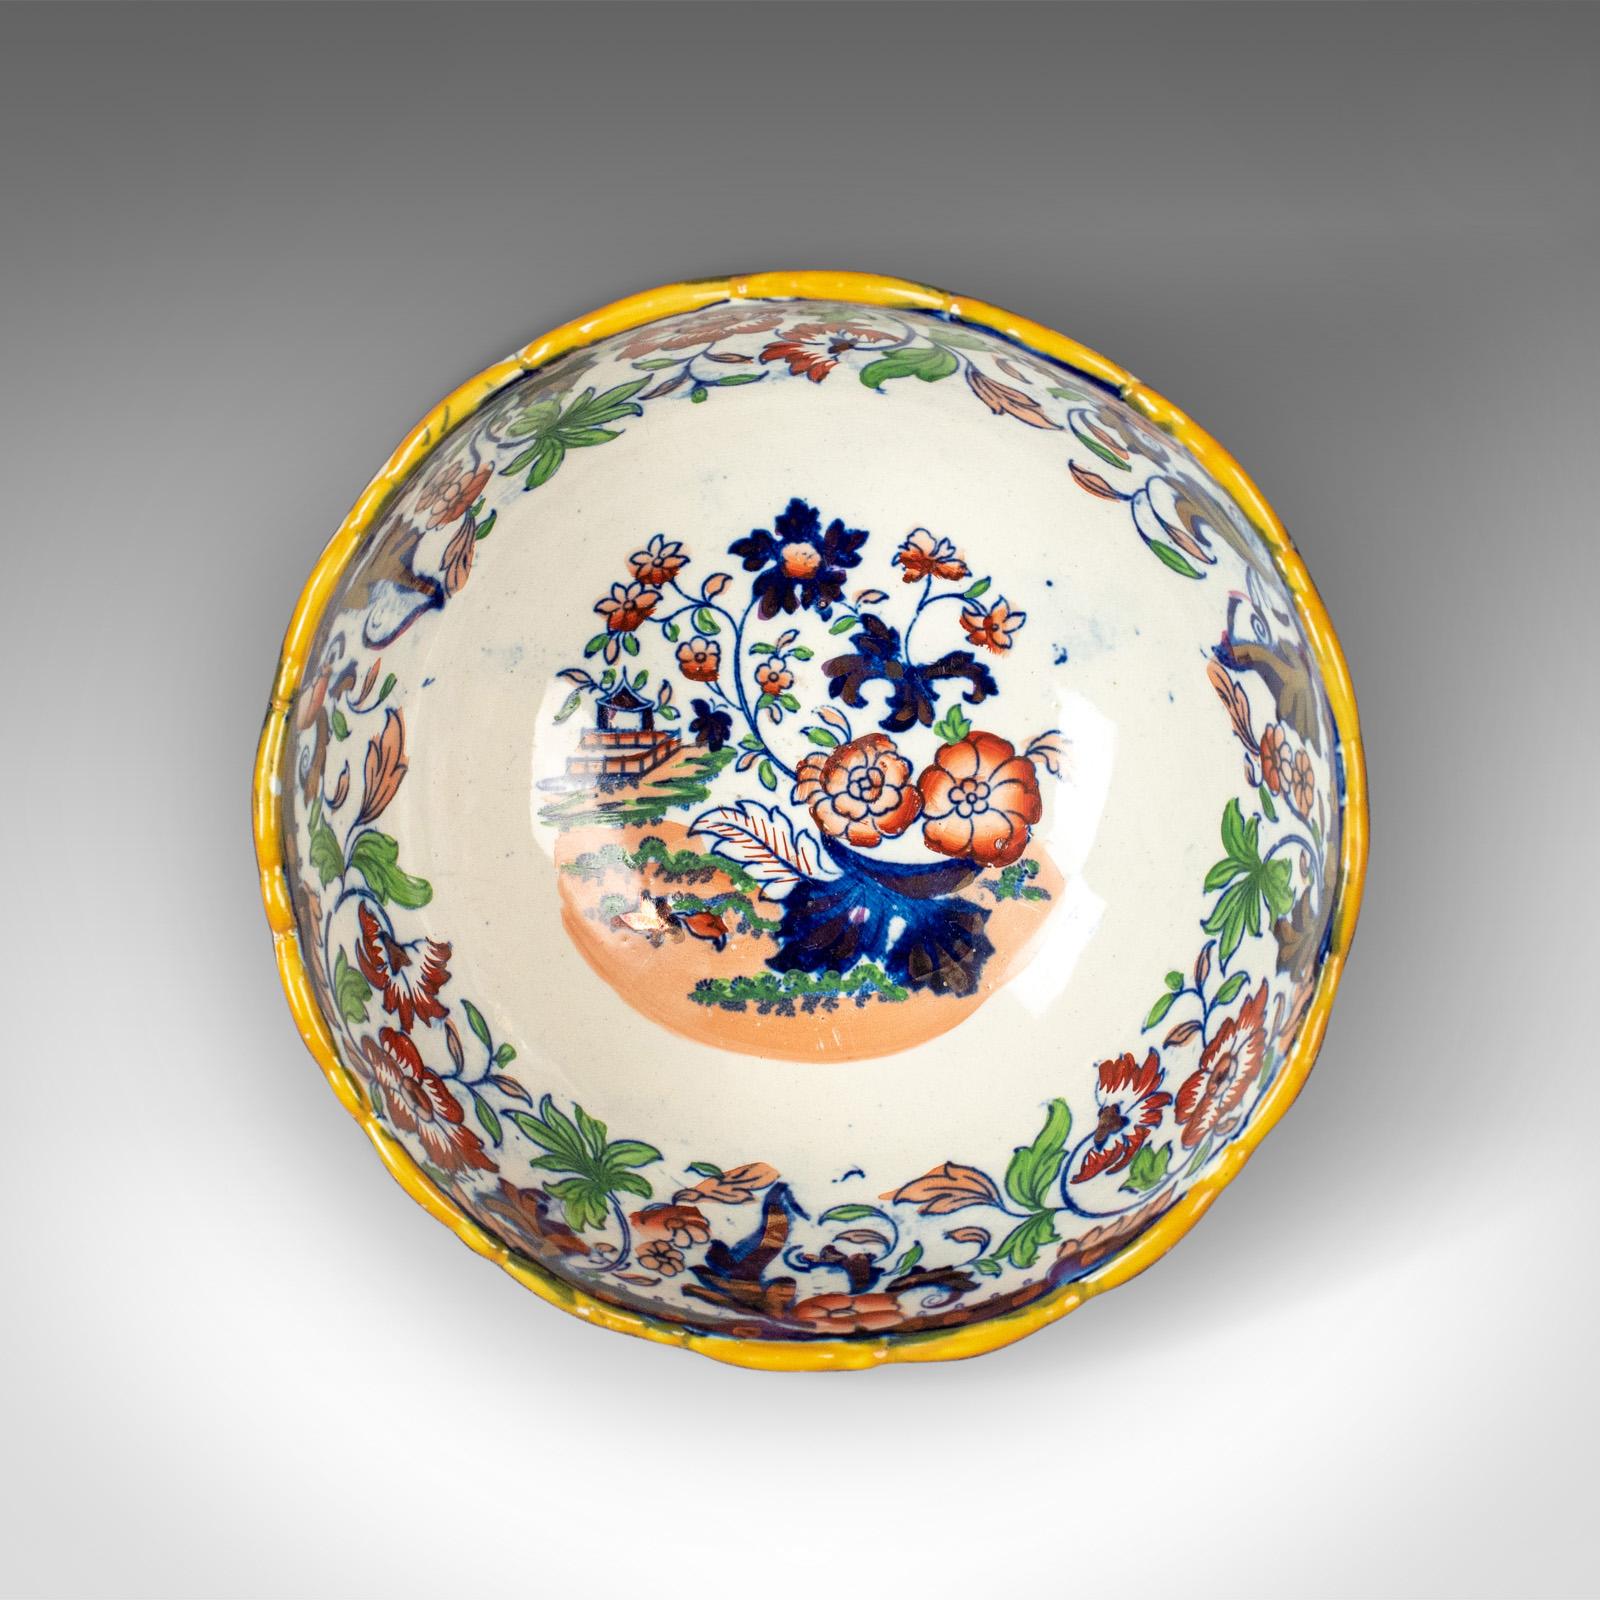 This is an antique footed bowl in blue, white and ochre. An Amherst Japan ironstone fruit bowl, made in England, circa 1900.

An attractive bowl in good condition throughout
Painted with floral and foliate detail with an ochre rim
The theme